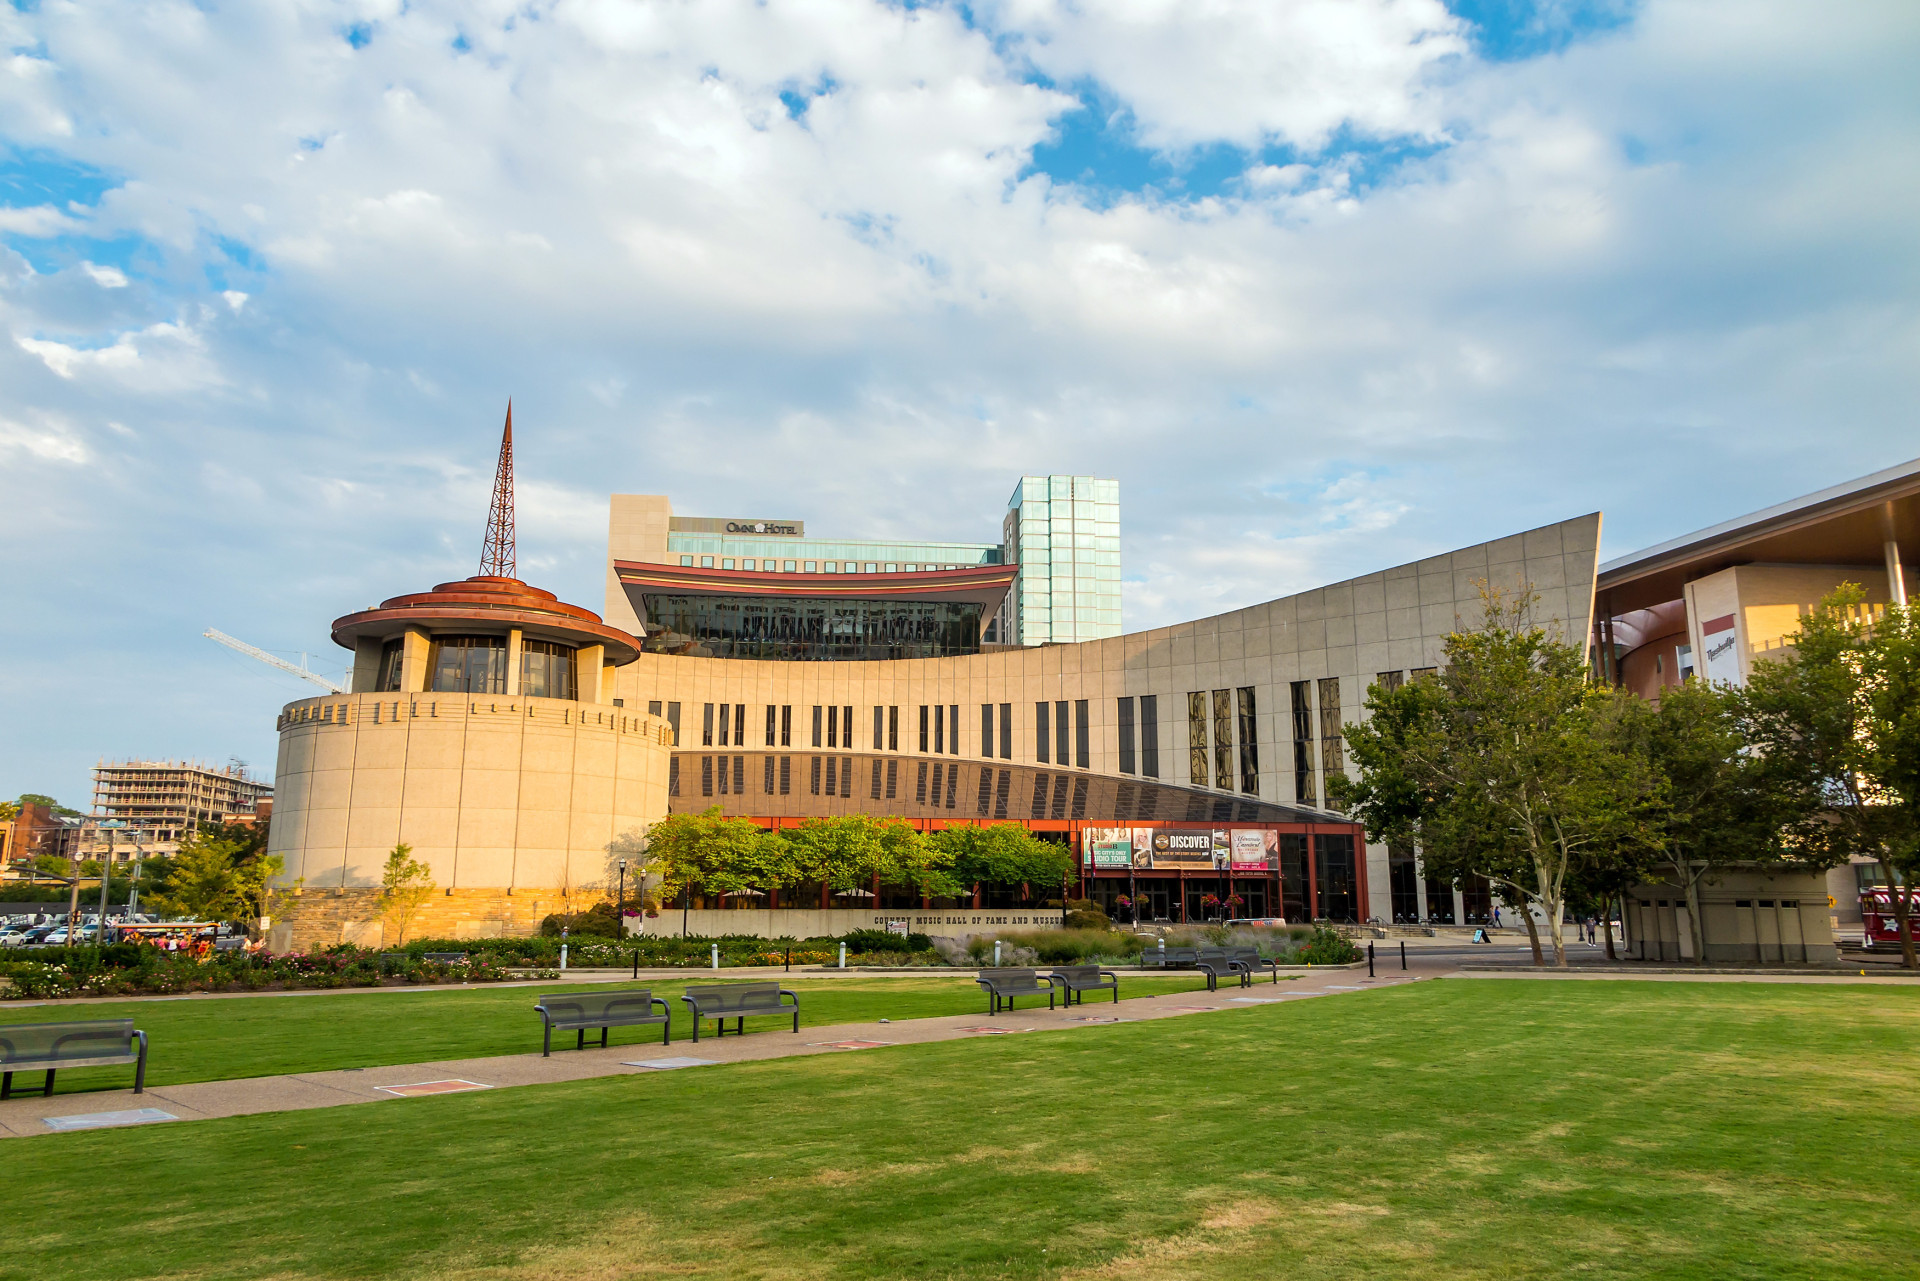 After your musical journey thus far, you're finally ready to go country at the Country Music Hall of Fame and Museum.